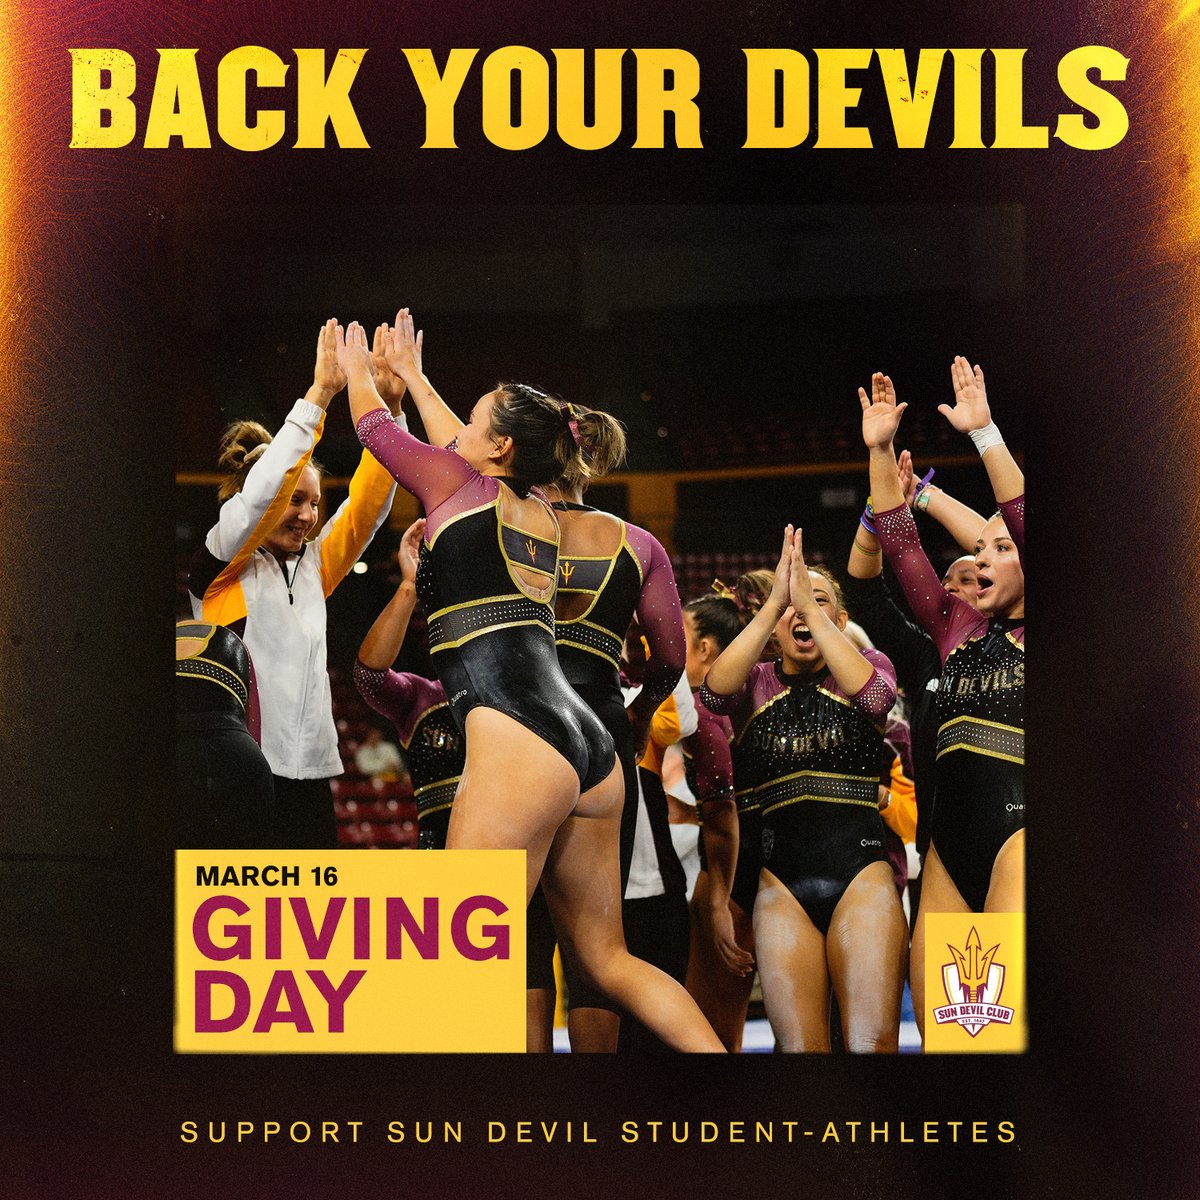 You can make a difference 💛

Today is Giving Day! Any contributions can help our program achieve new heights 👊

Donate here >> bit.ly/3ZGvjmb

#GymDevils /// #ForksUp